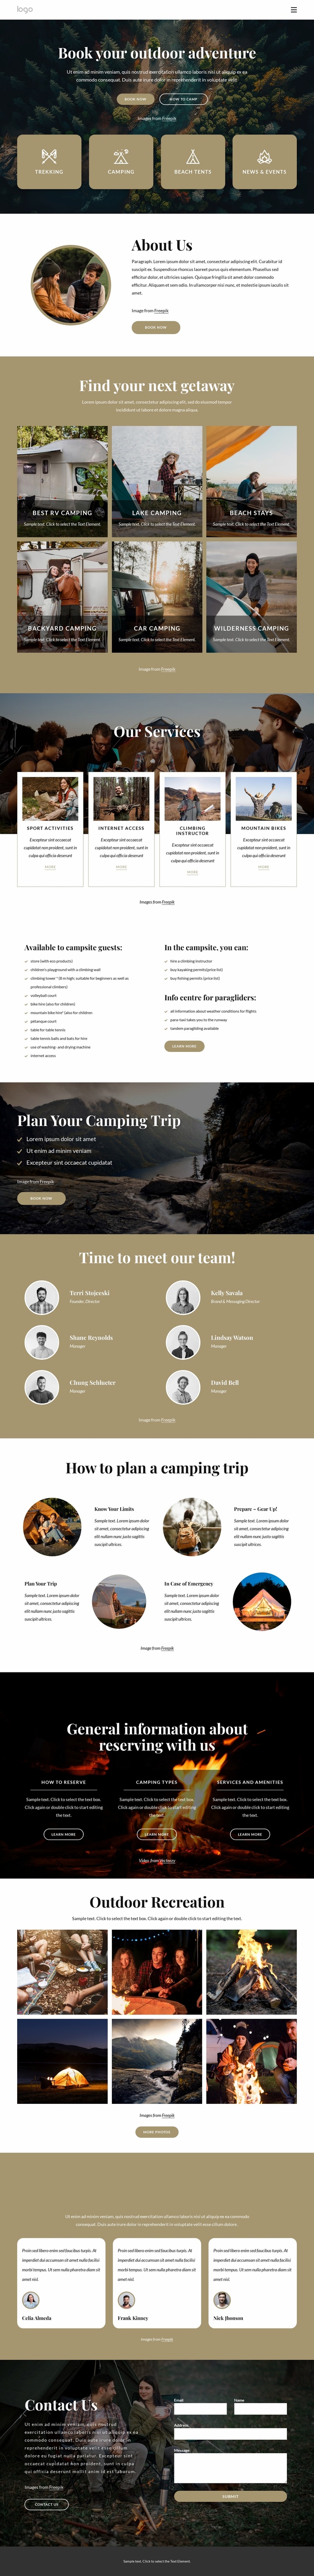 Book your outdoor adventure Landing Page